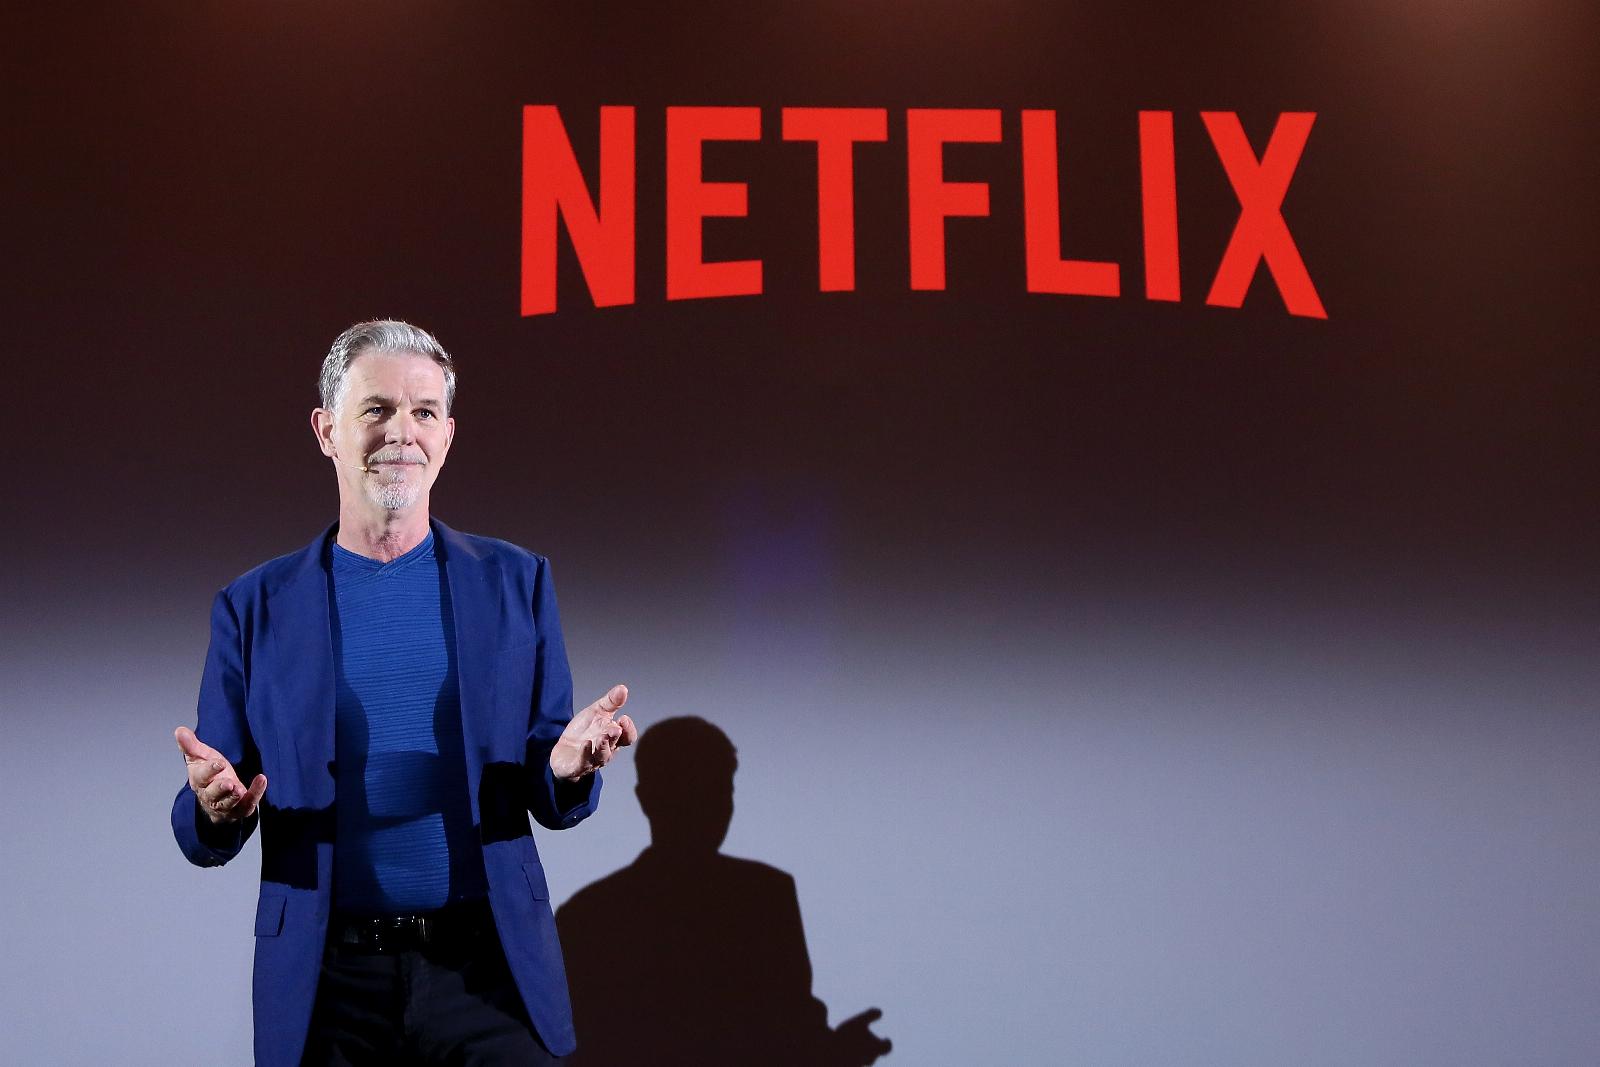 Netflix founder Reed Hastings steps down as co-CEO